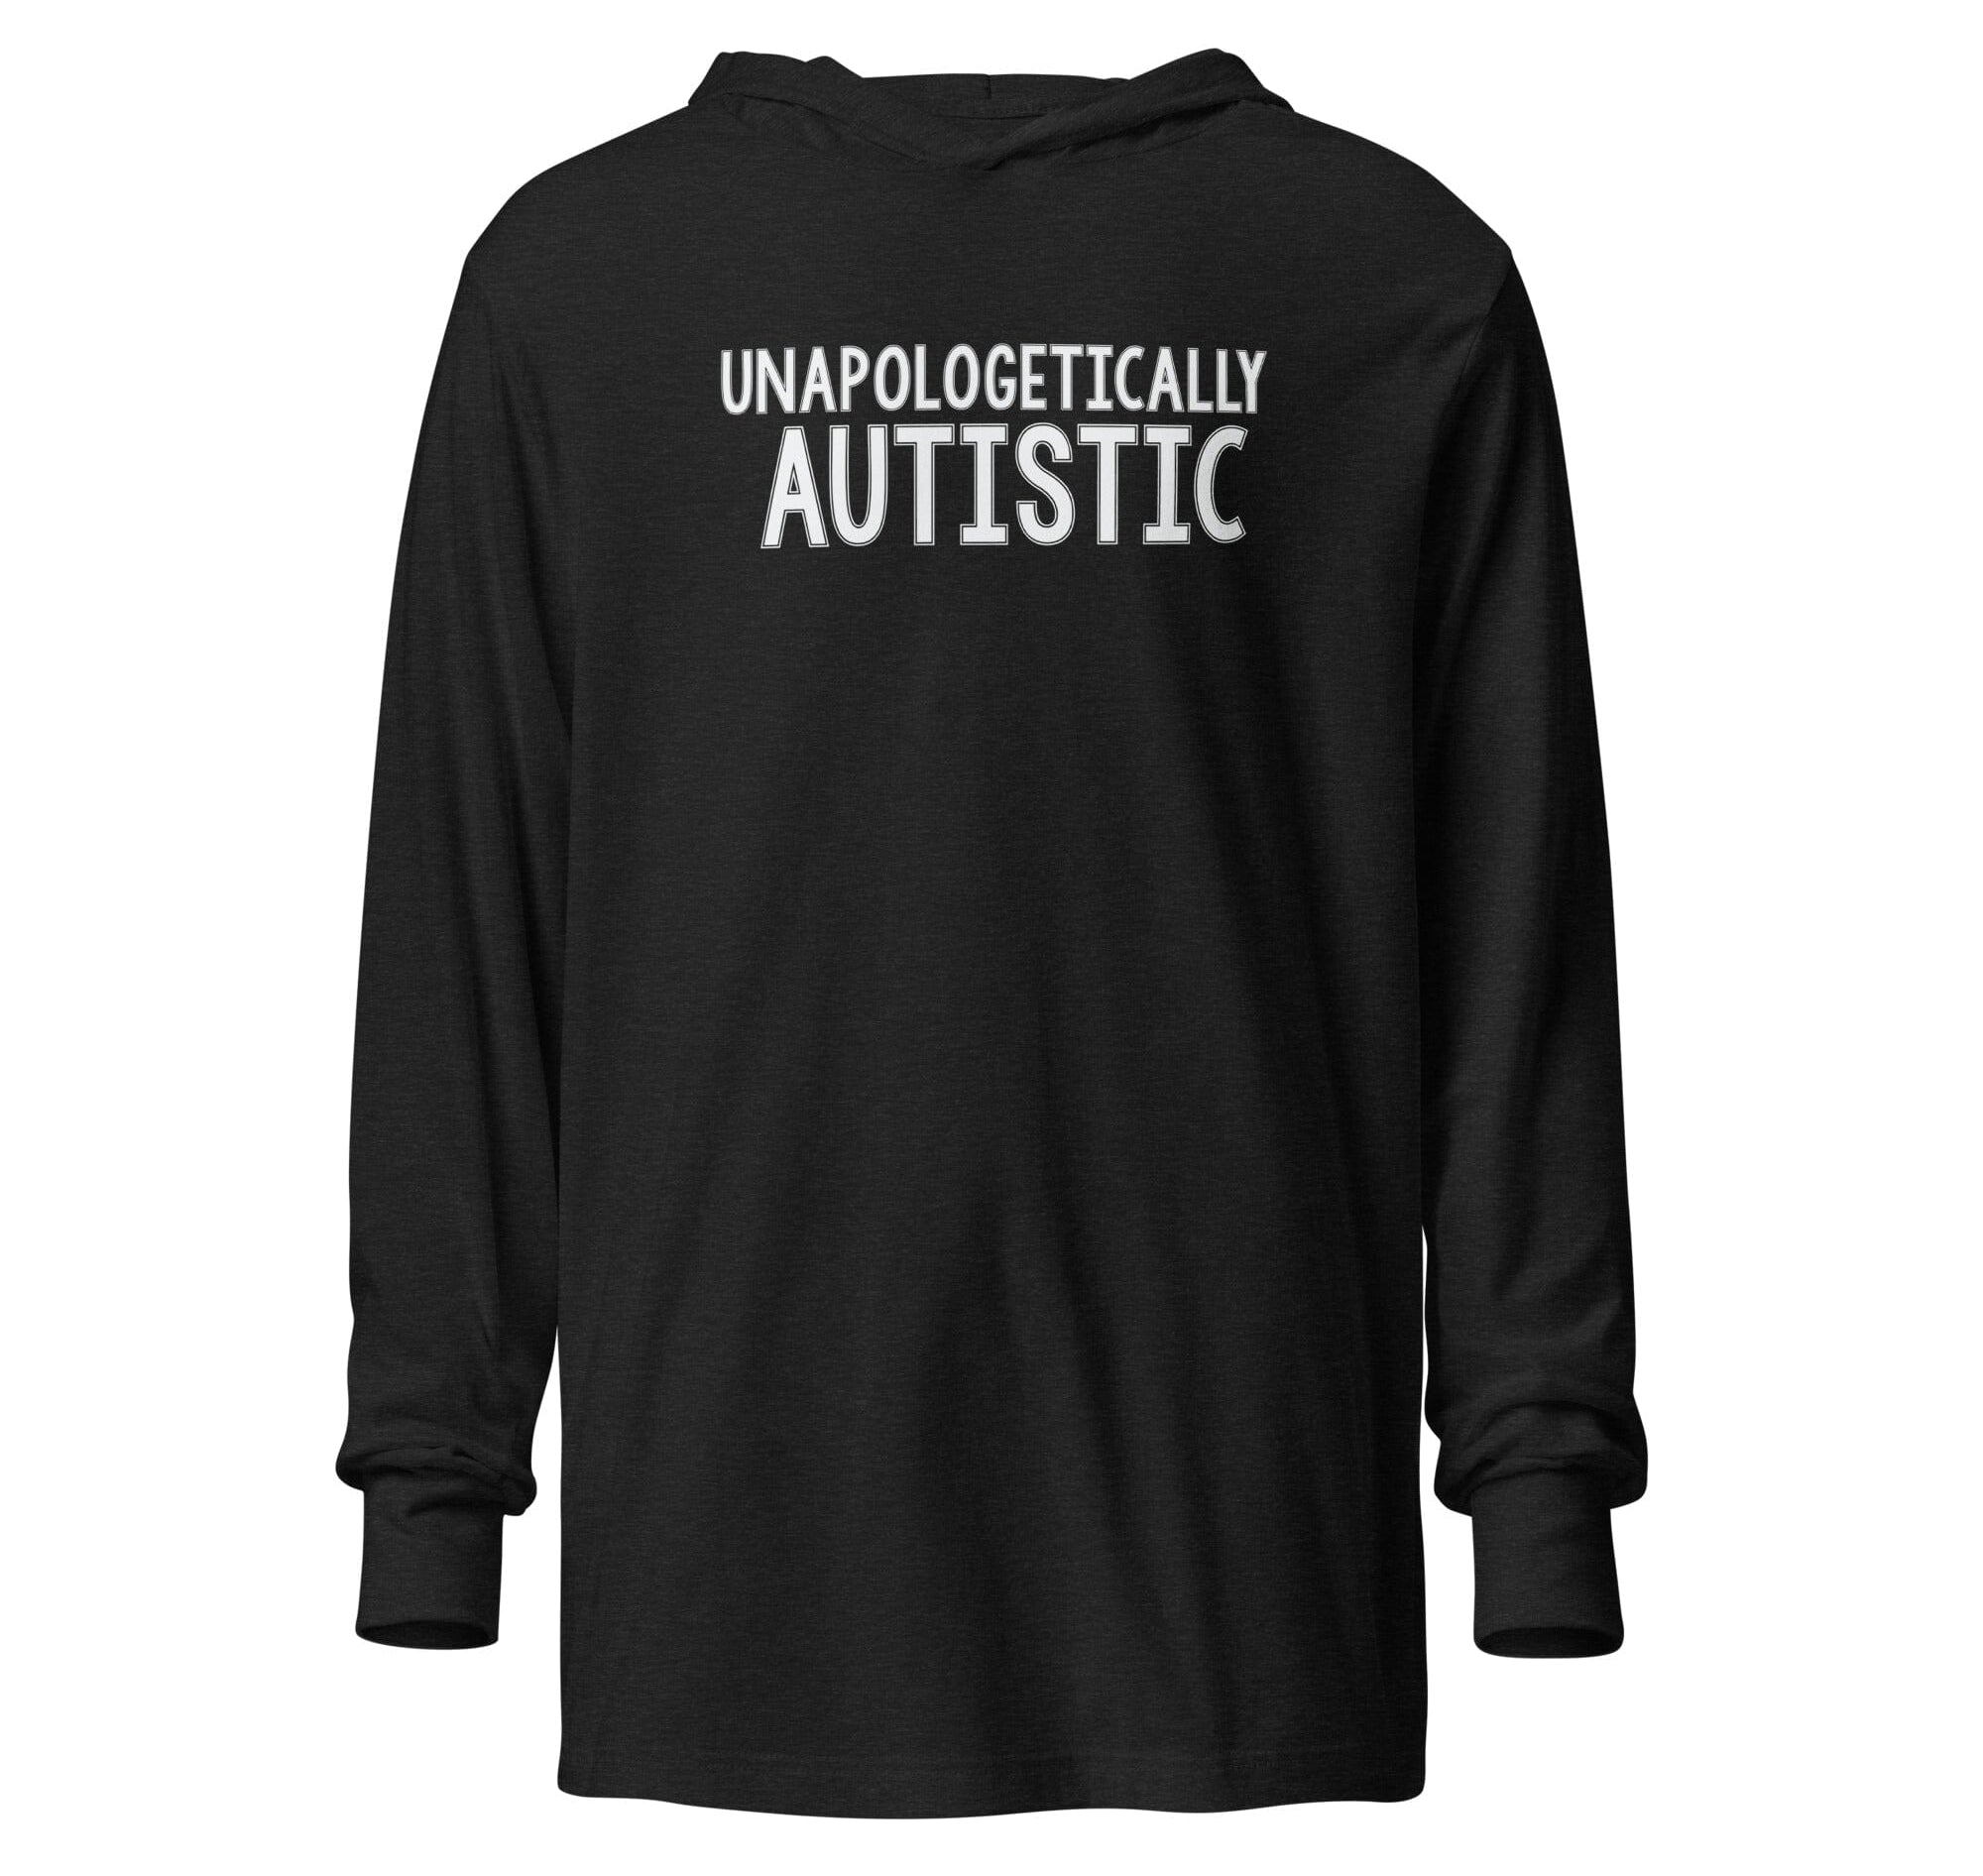 Unapologetically Autistic Unisex Hooded long-sleeve tee The Autistic Innovator Charcoal-Black Triblend XS 